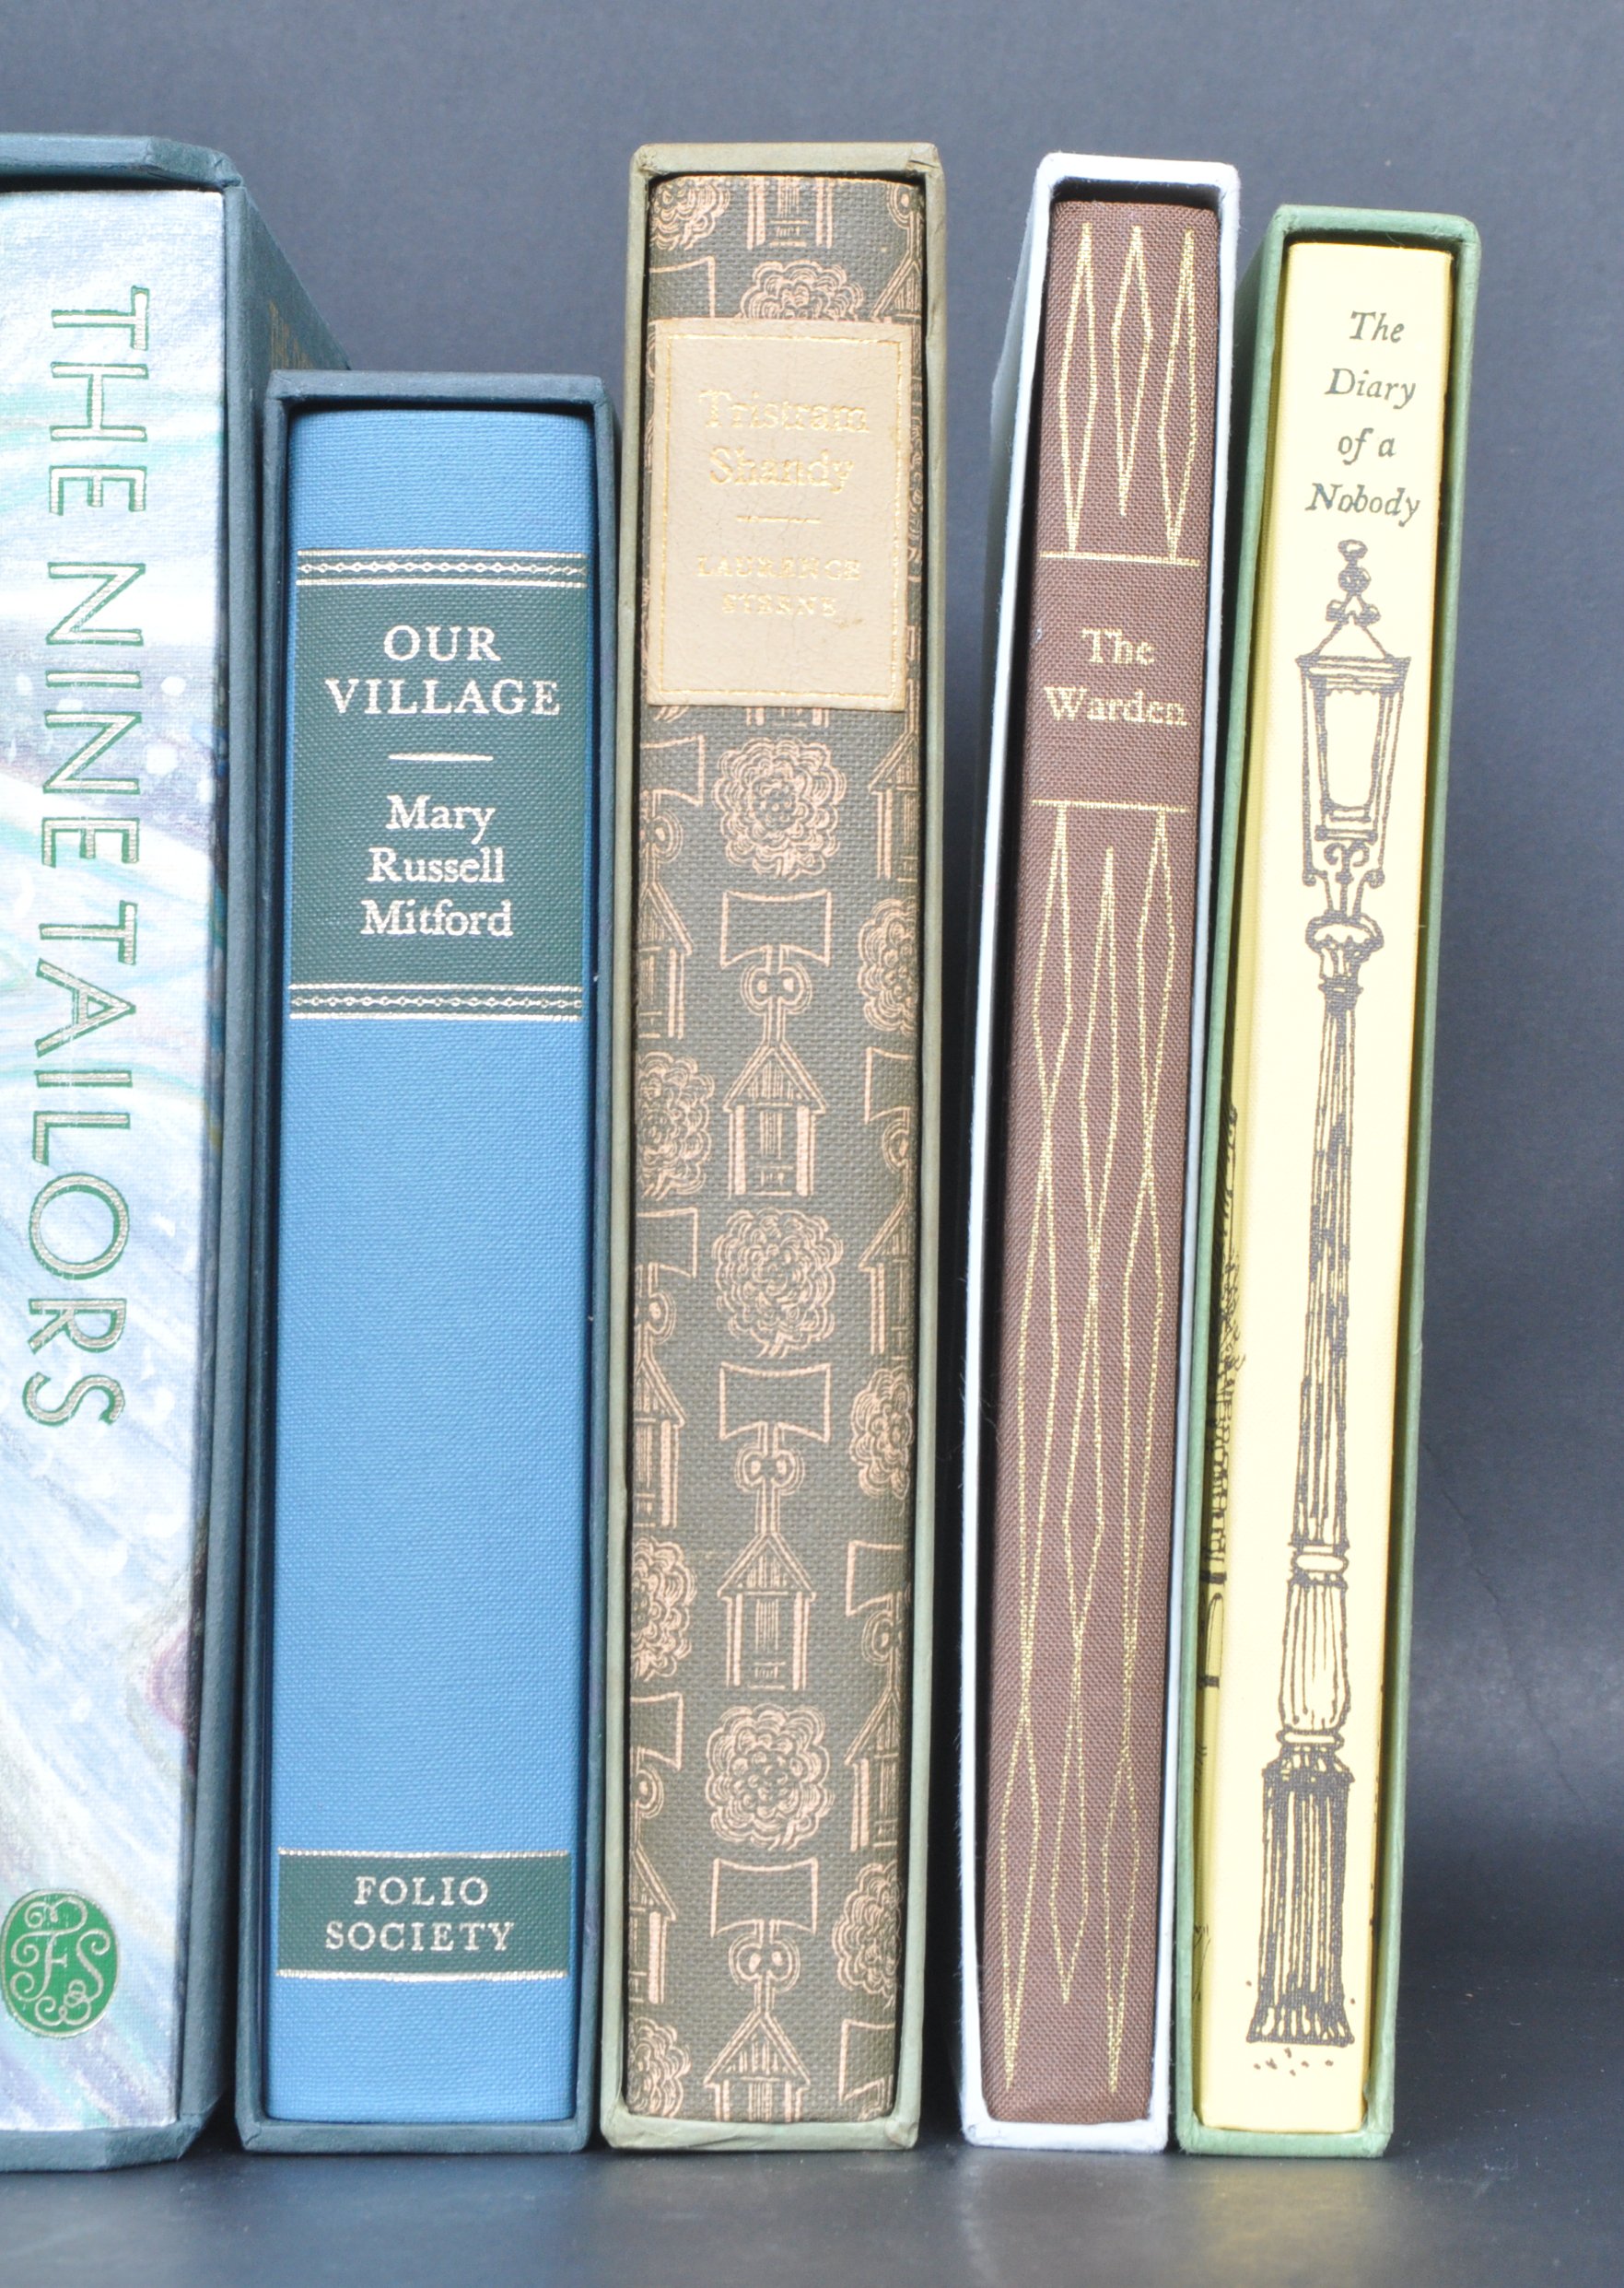 FOLIO SOCIETY - LARGE COLLECTION OF HARDCOVER FICTION BOOKS - Image 2 of 10